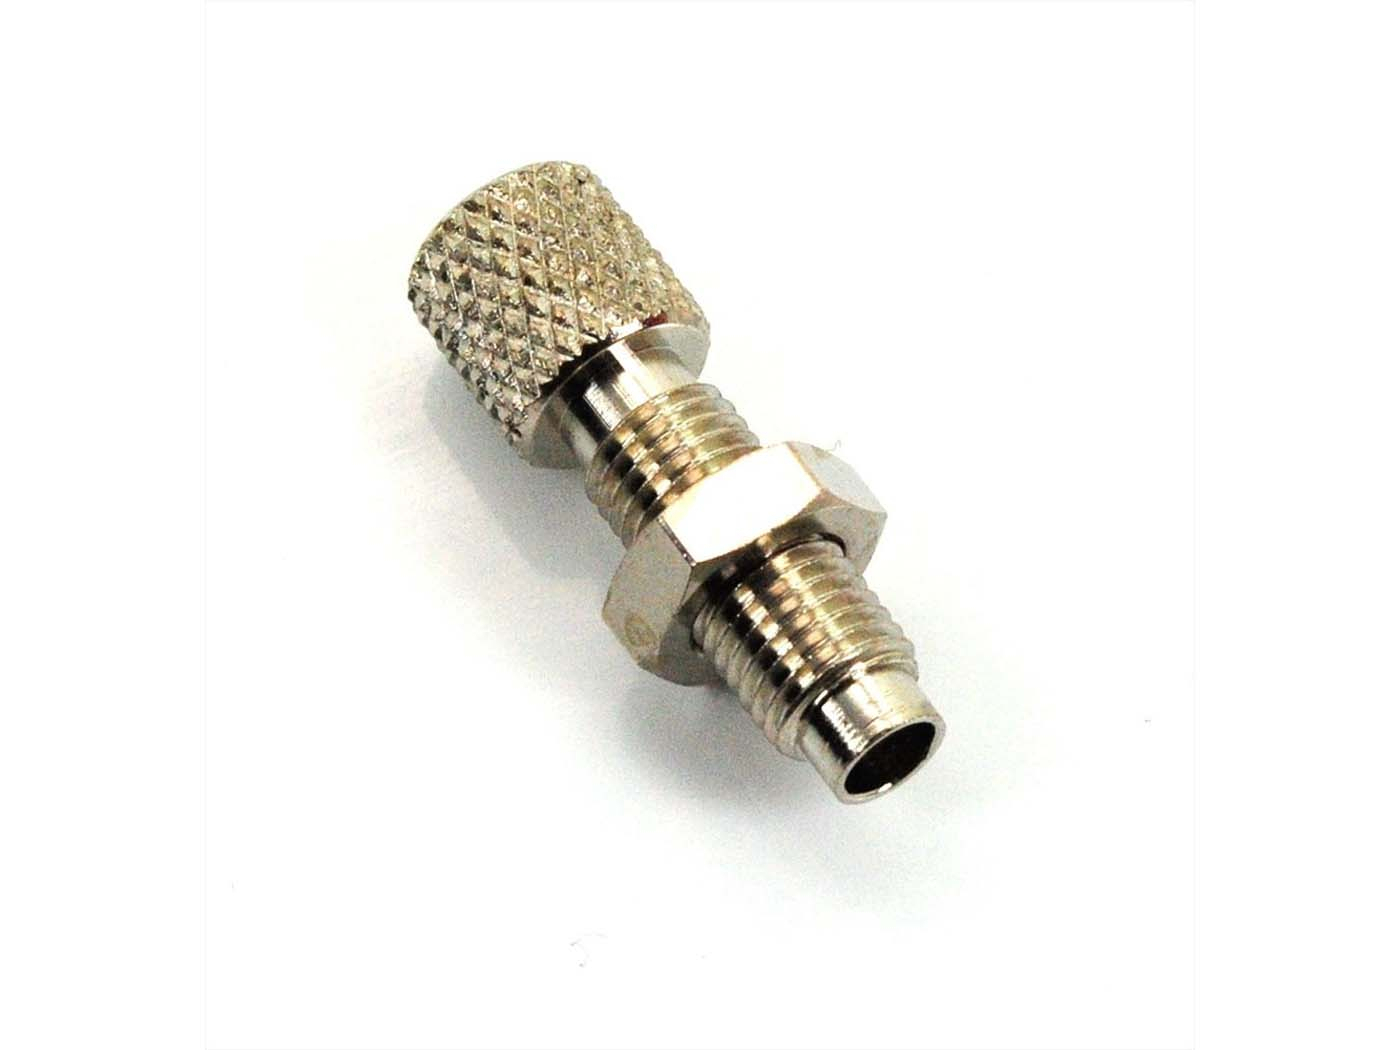 Carburetor Throttle Cable Adjusting Screw For Moped Moped